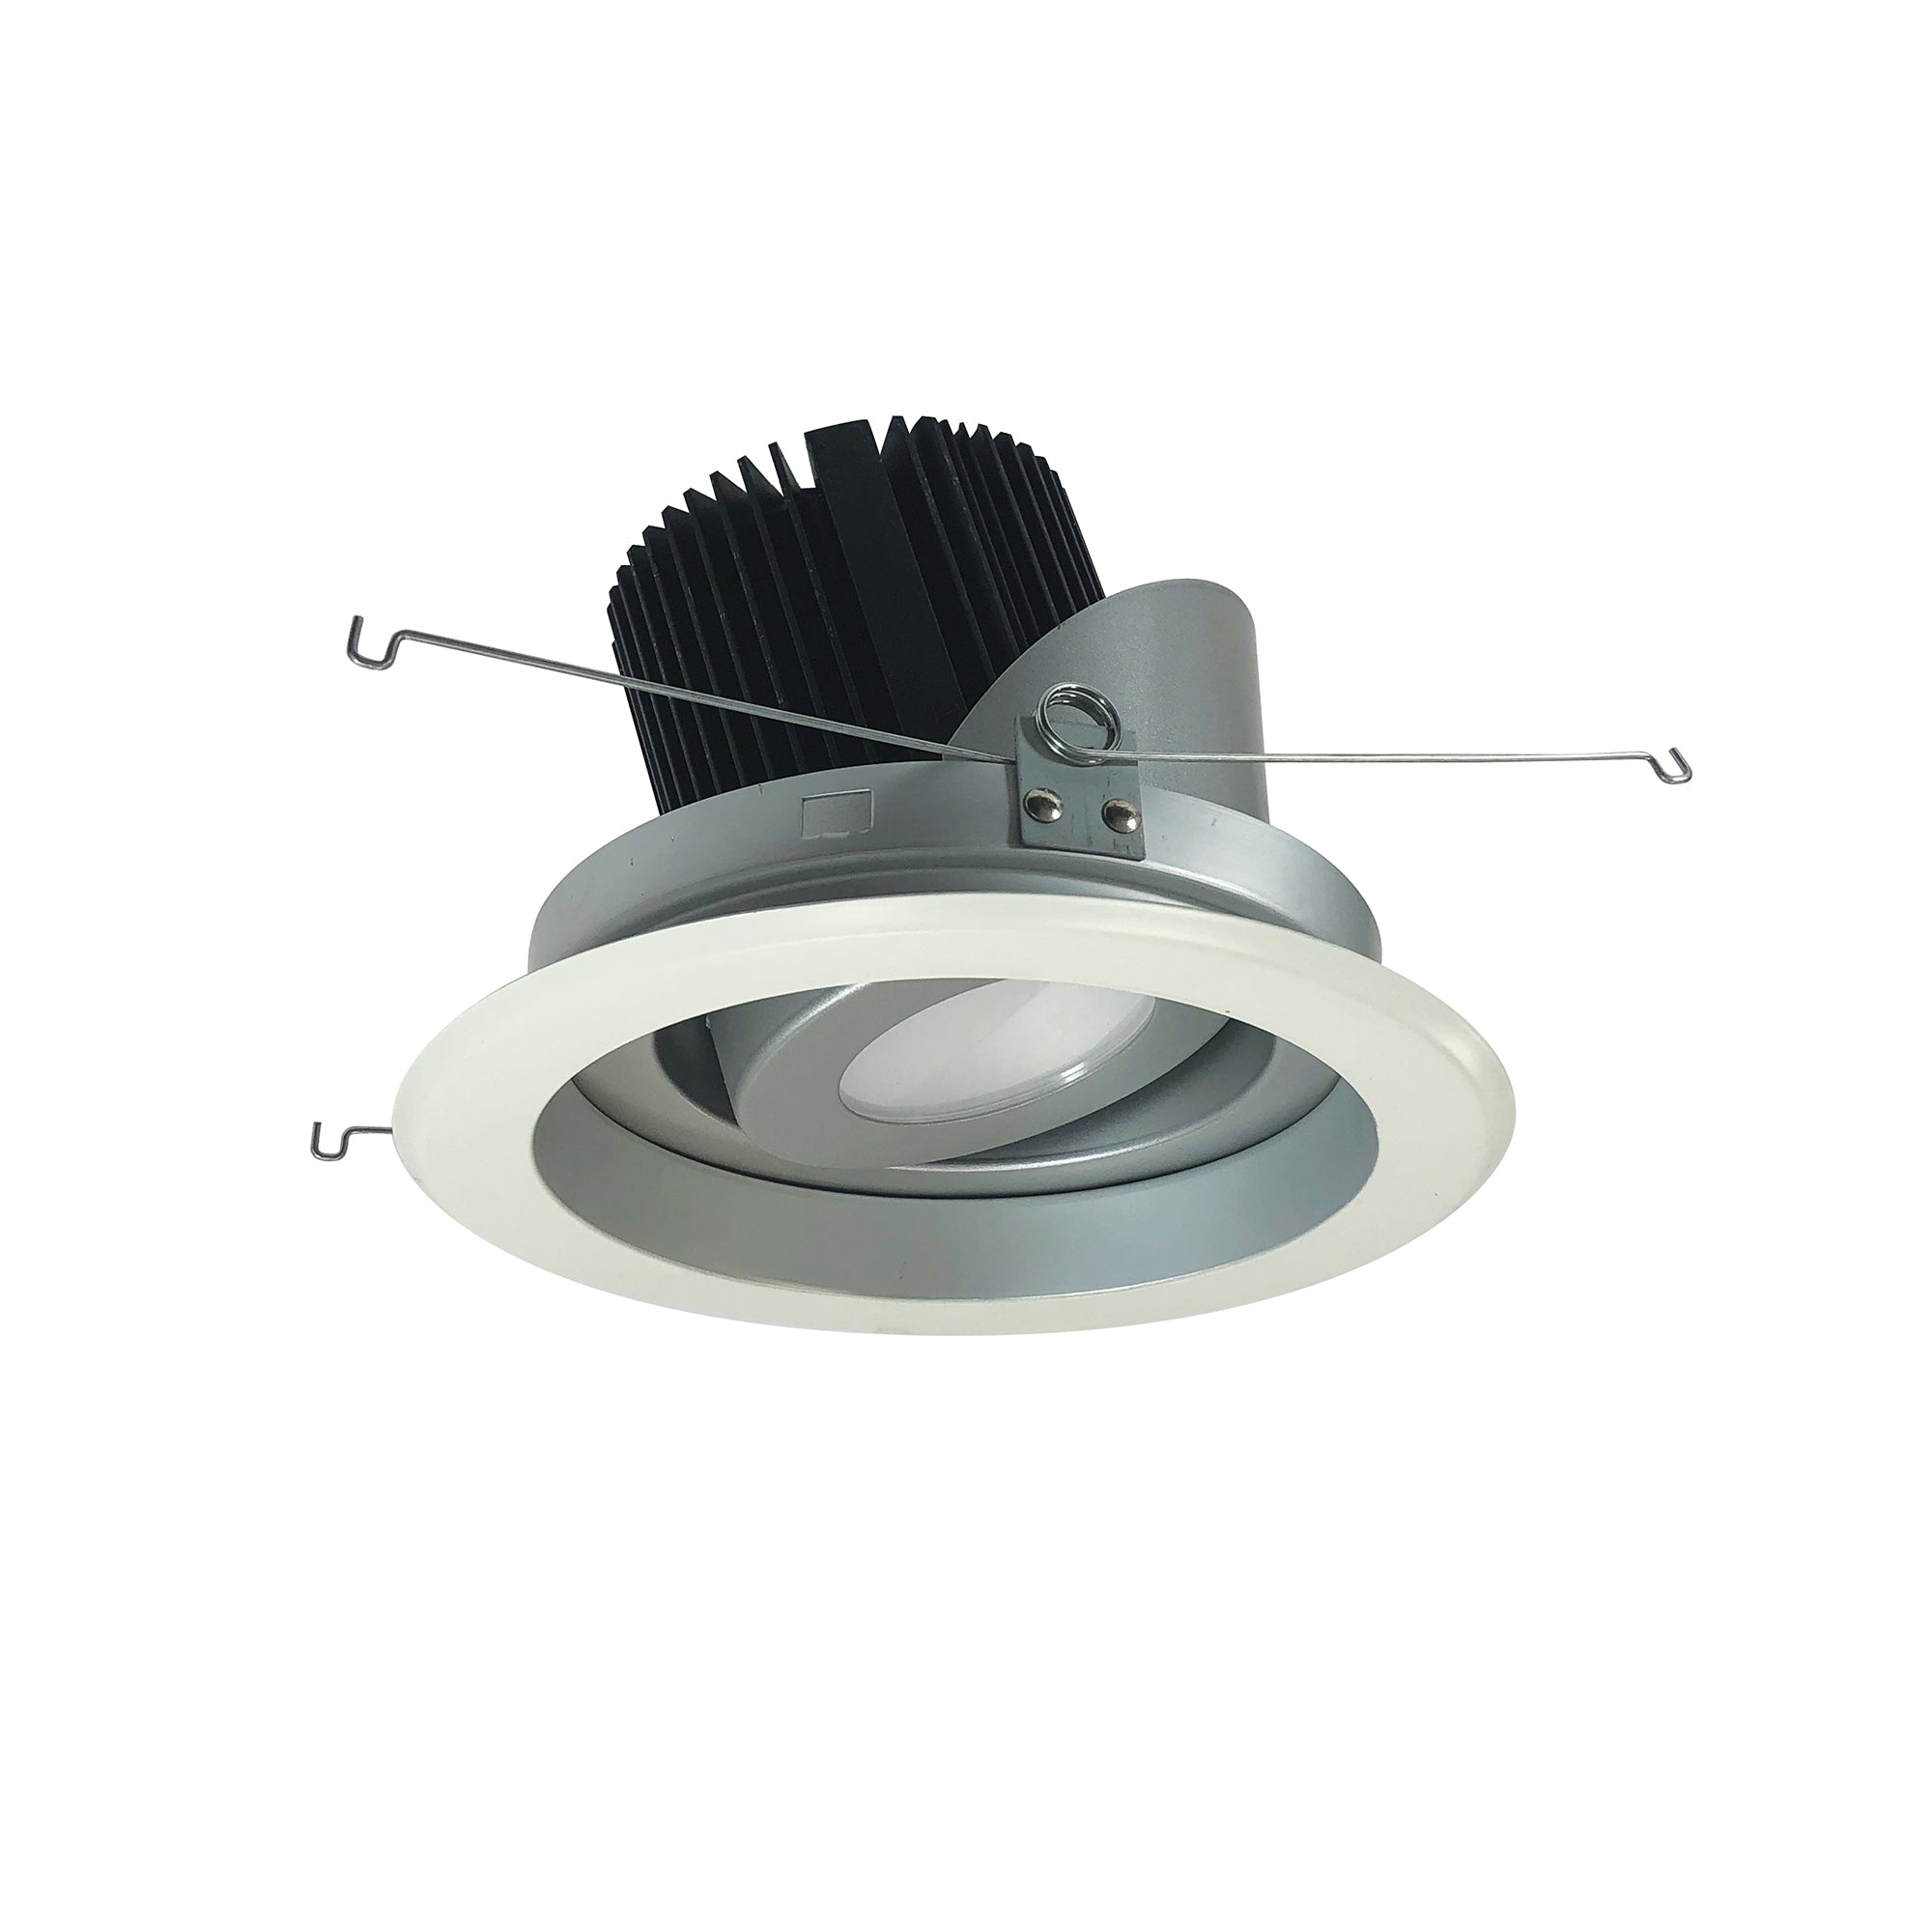 Nora Lighting NRM2-619L2530SHZW - Recessed - 6 Inch Marquise II Round Regressed Adj. Reflector, Spot, 2500lm, 3000K, Haze/White (Not Compatible with NHRM2-625 Housings)